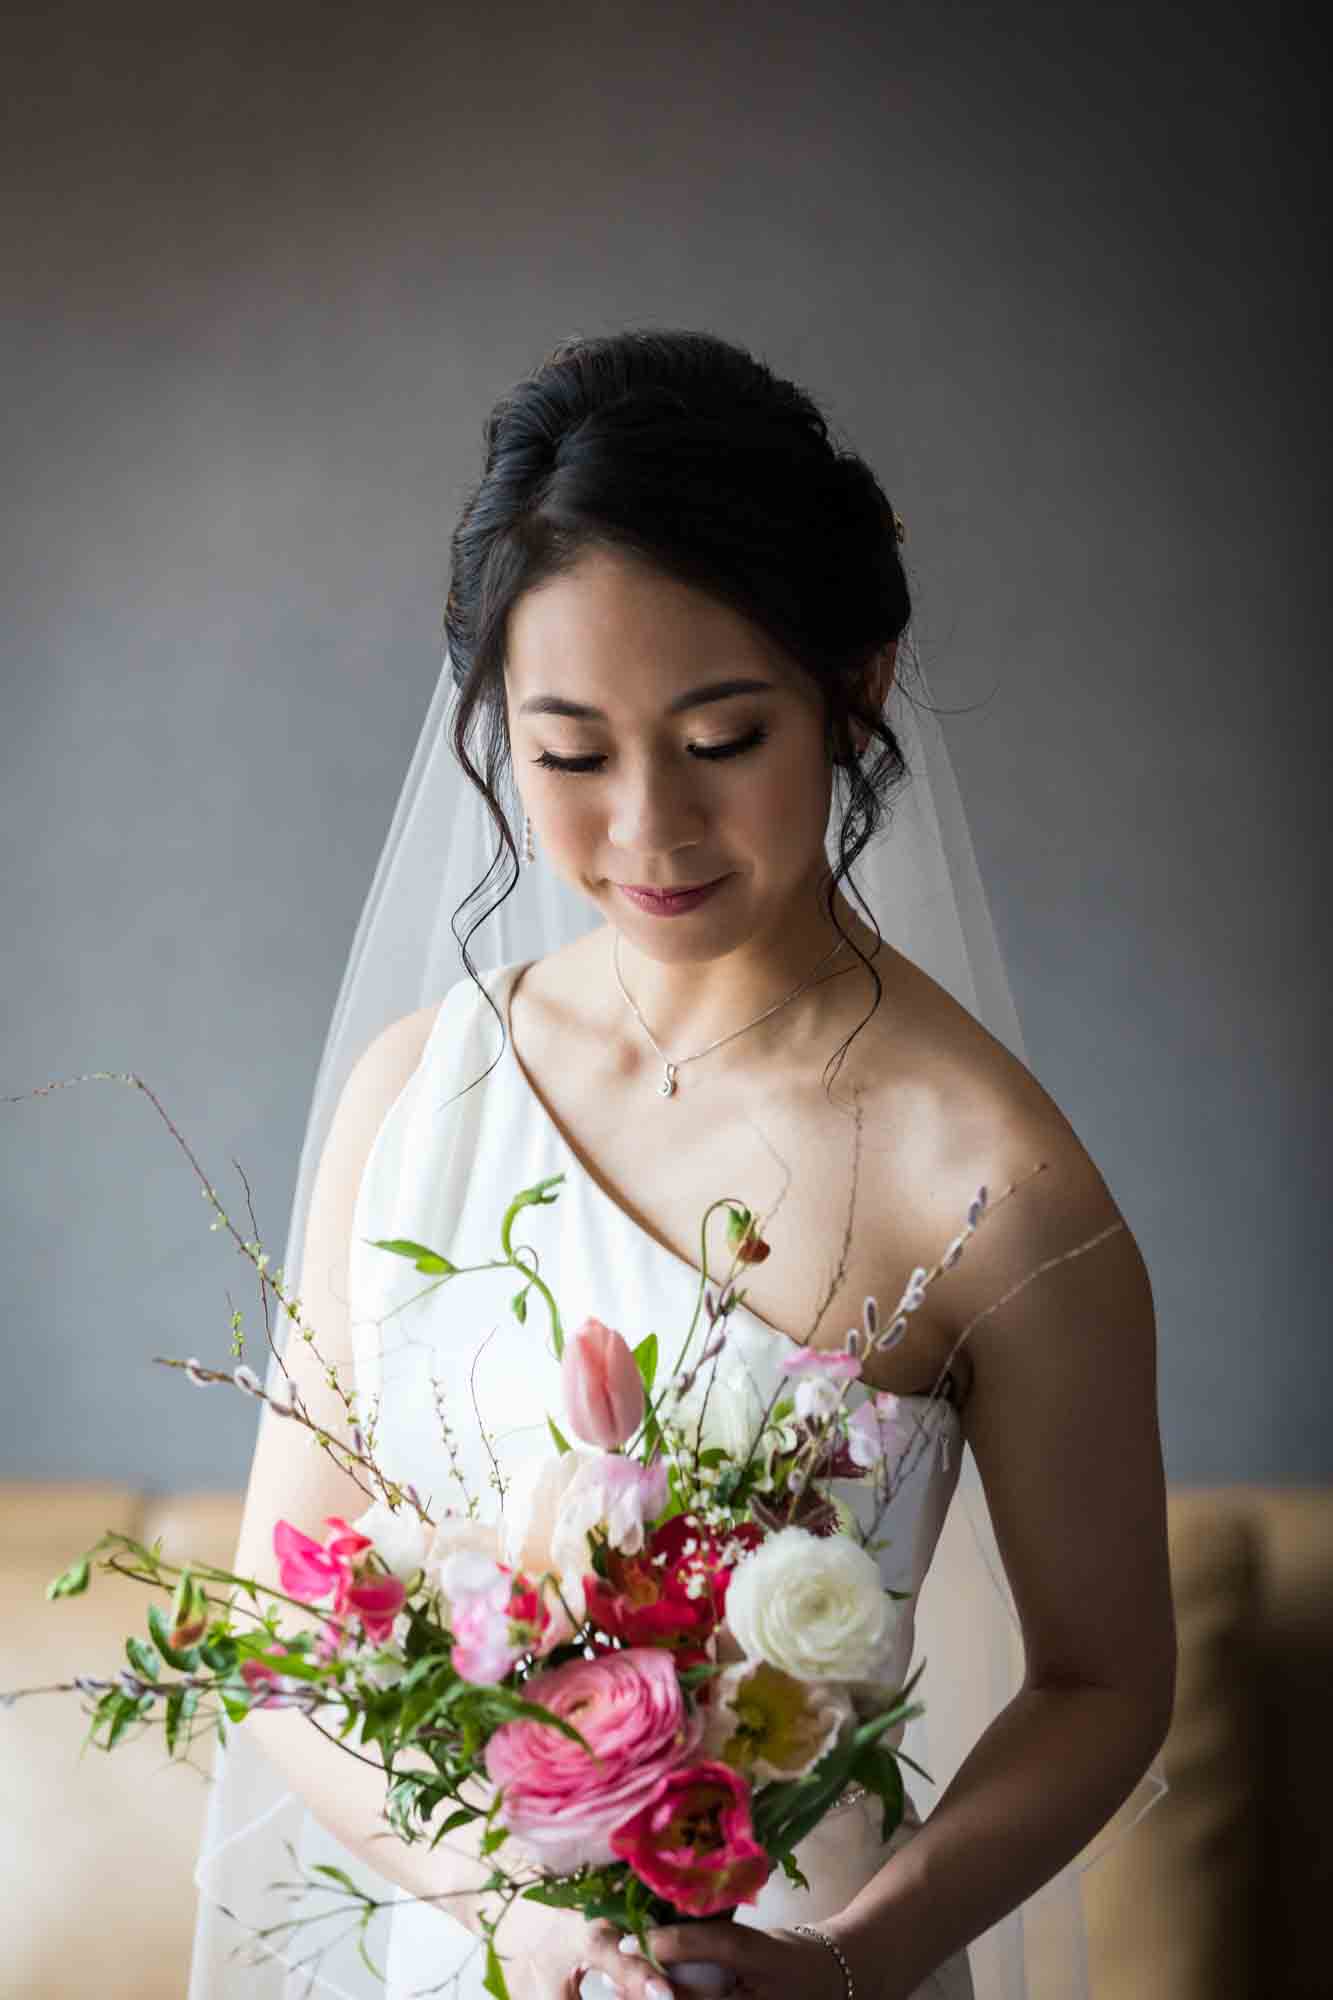 Bride looking down at flowers while wearing one-shoulder dress